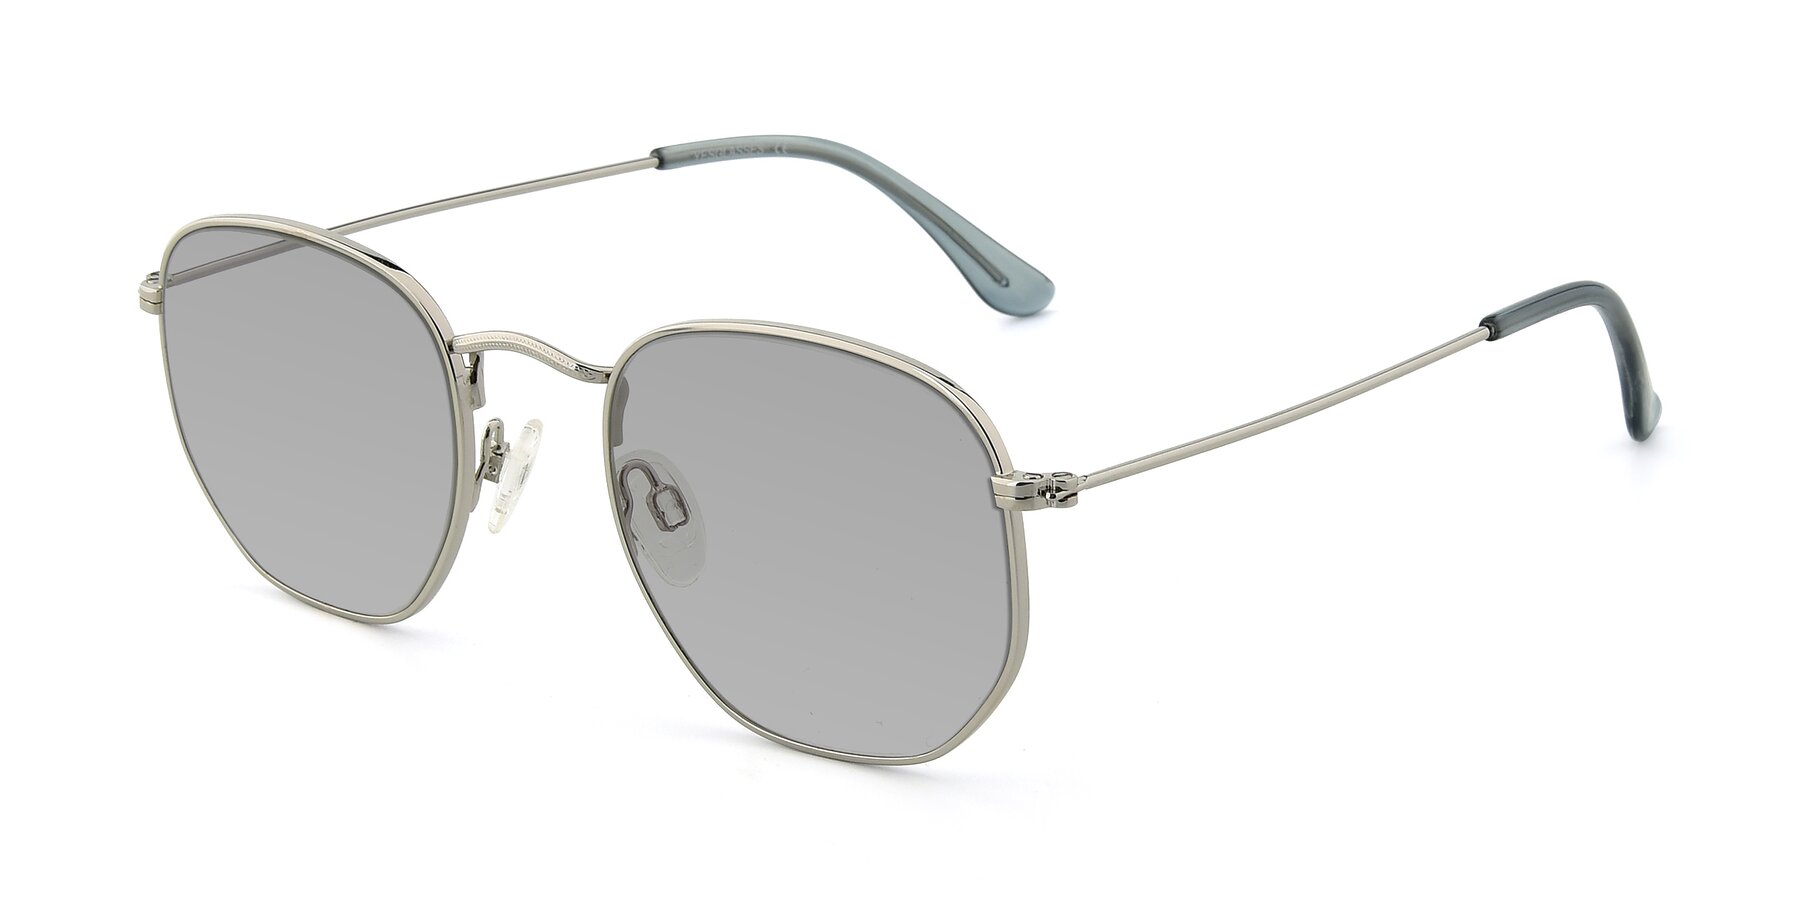 Angle of SSR1944 in Silver with Light Gray Tinted Lenses